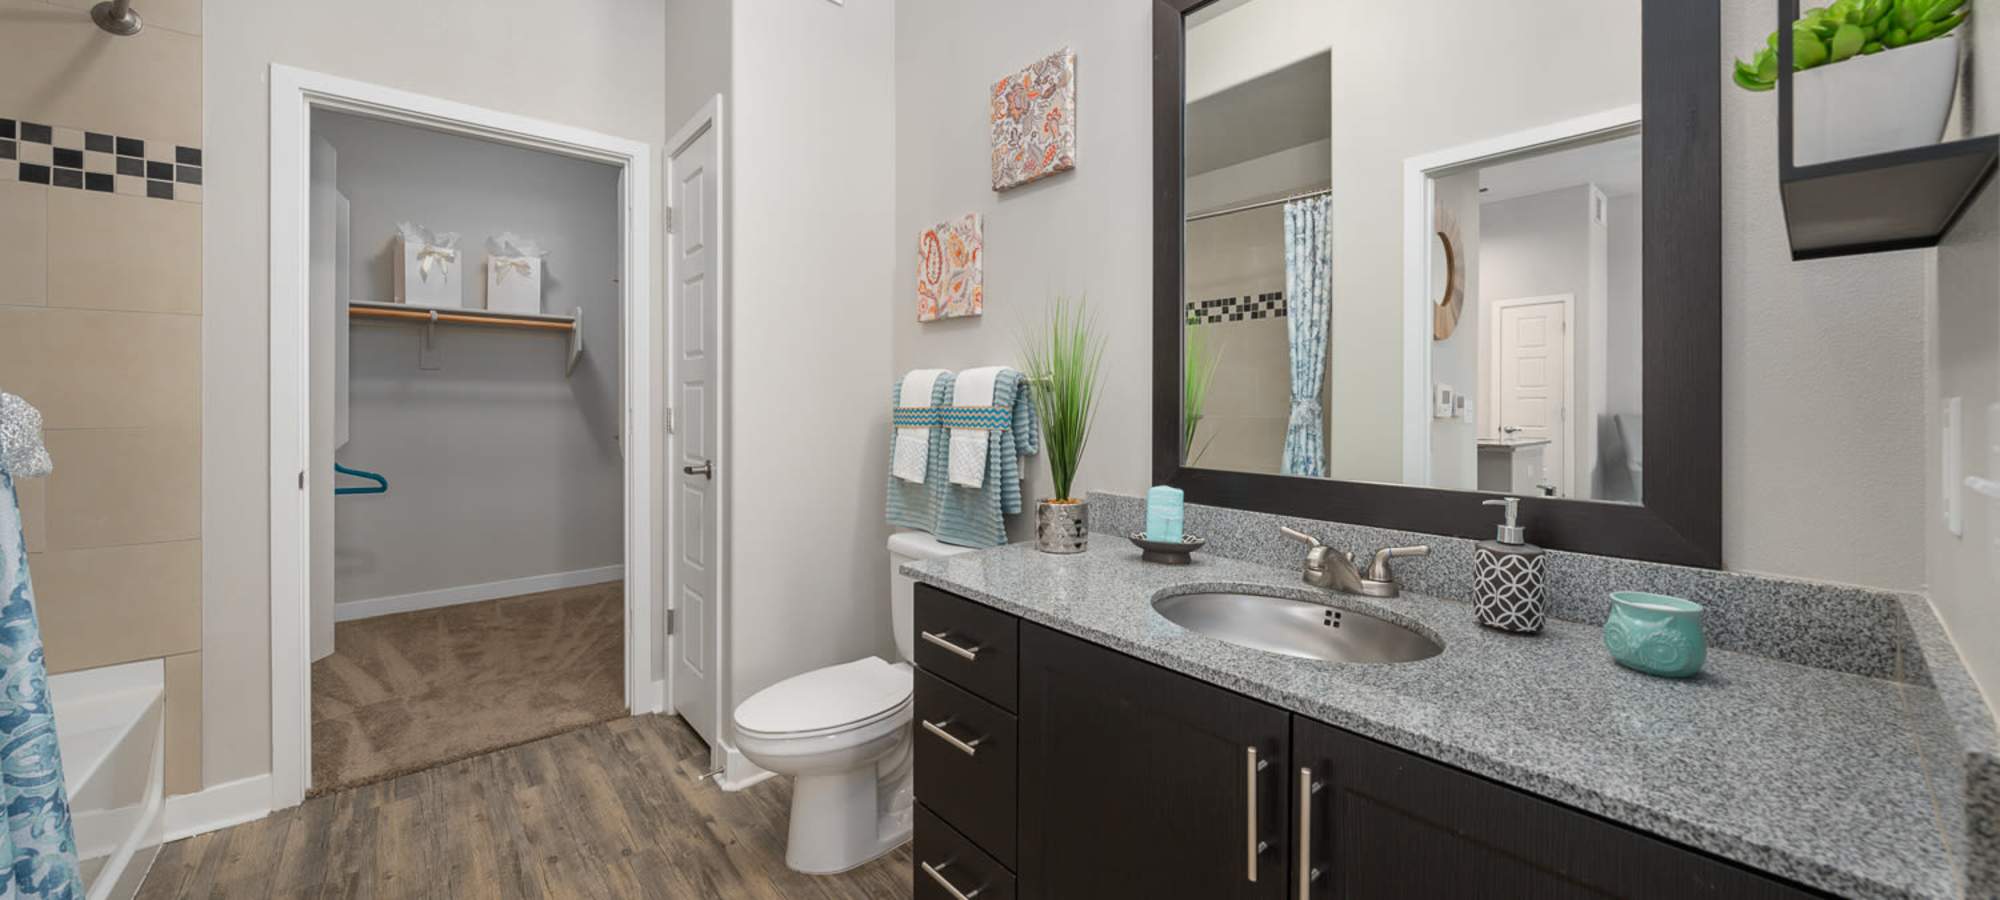 Large bathroom with adjacent walk-in closet in model home at The Hyve in Tempe, Arizona